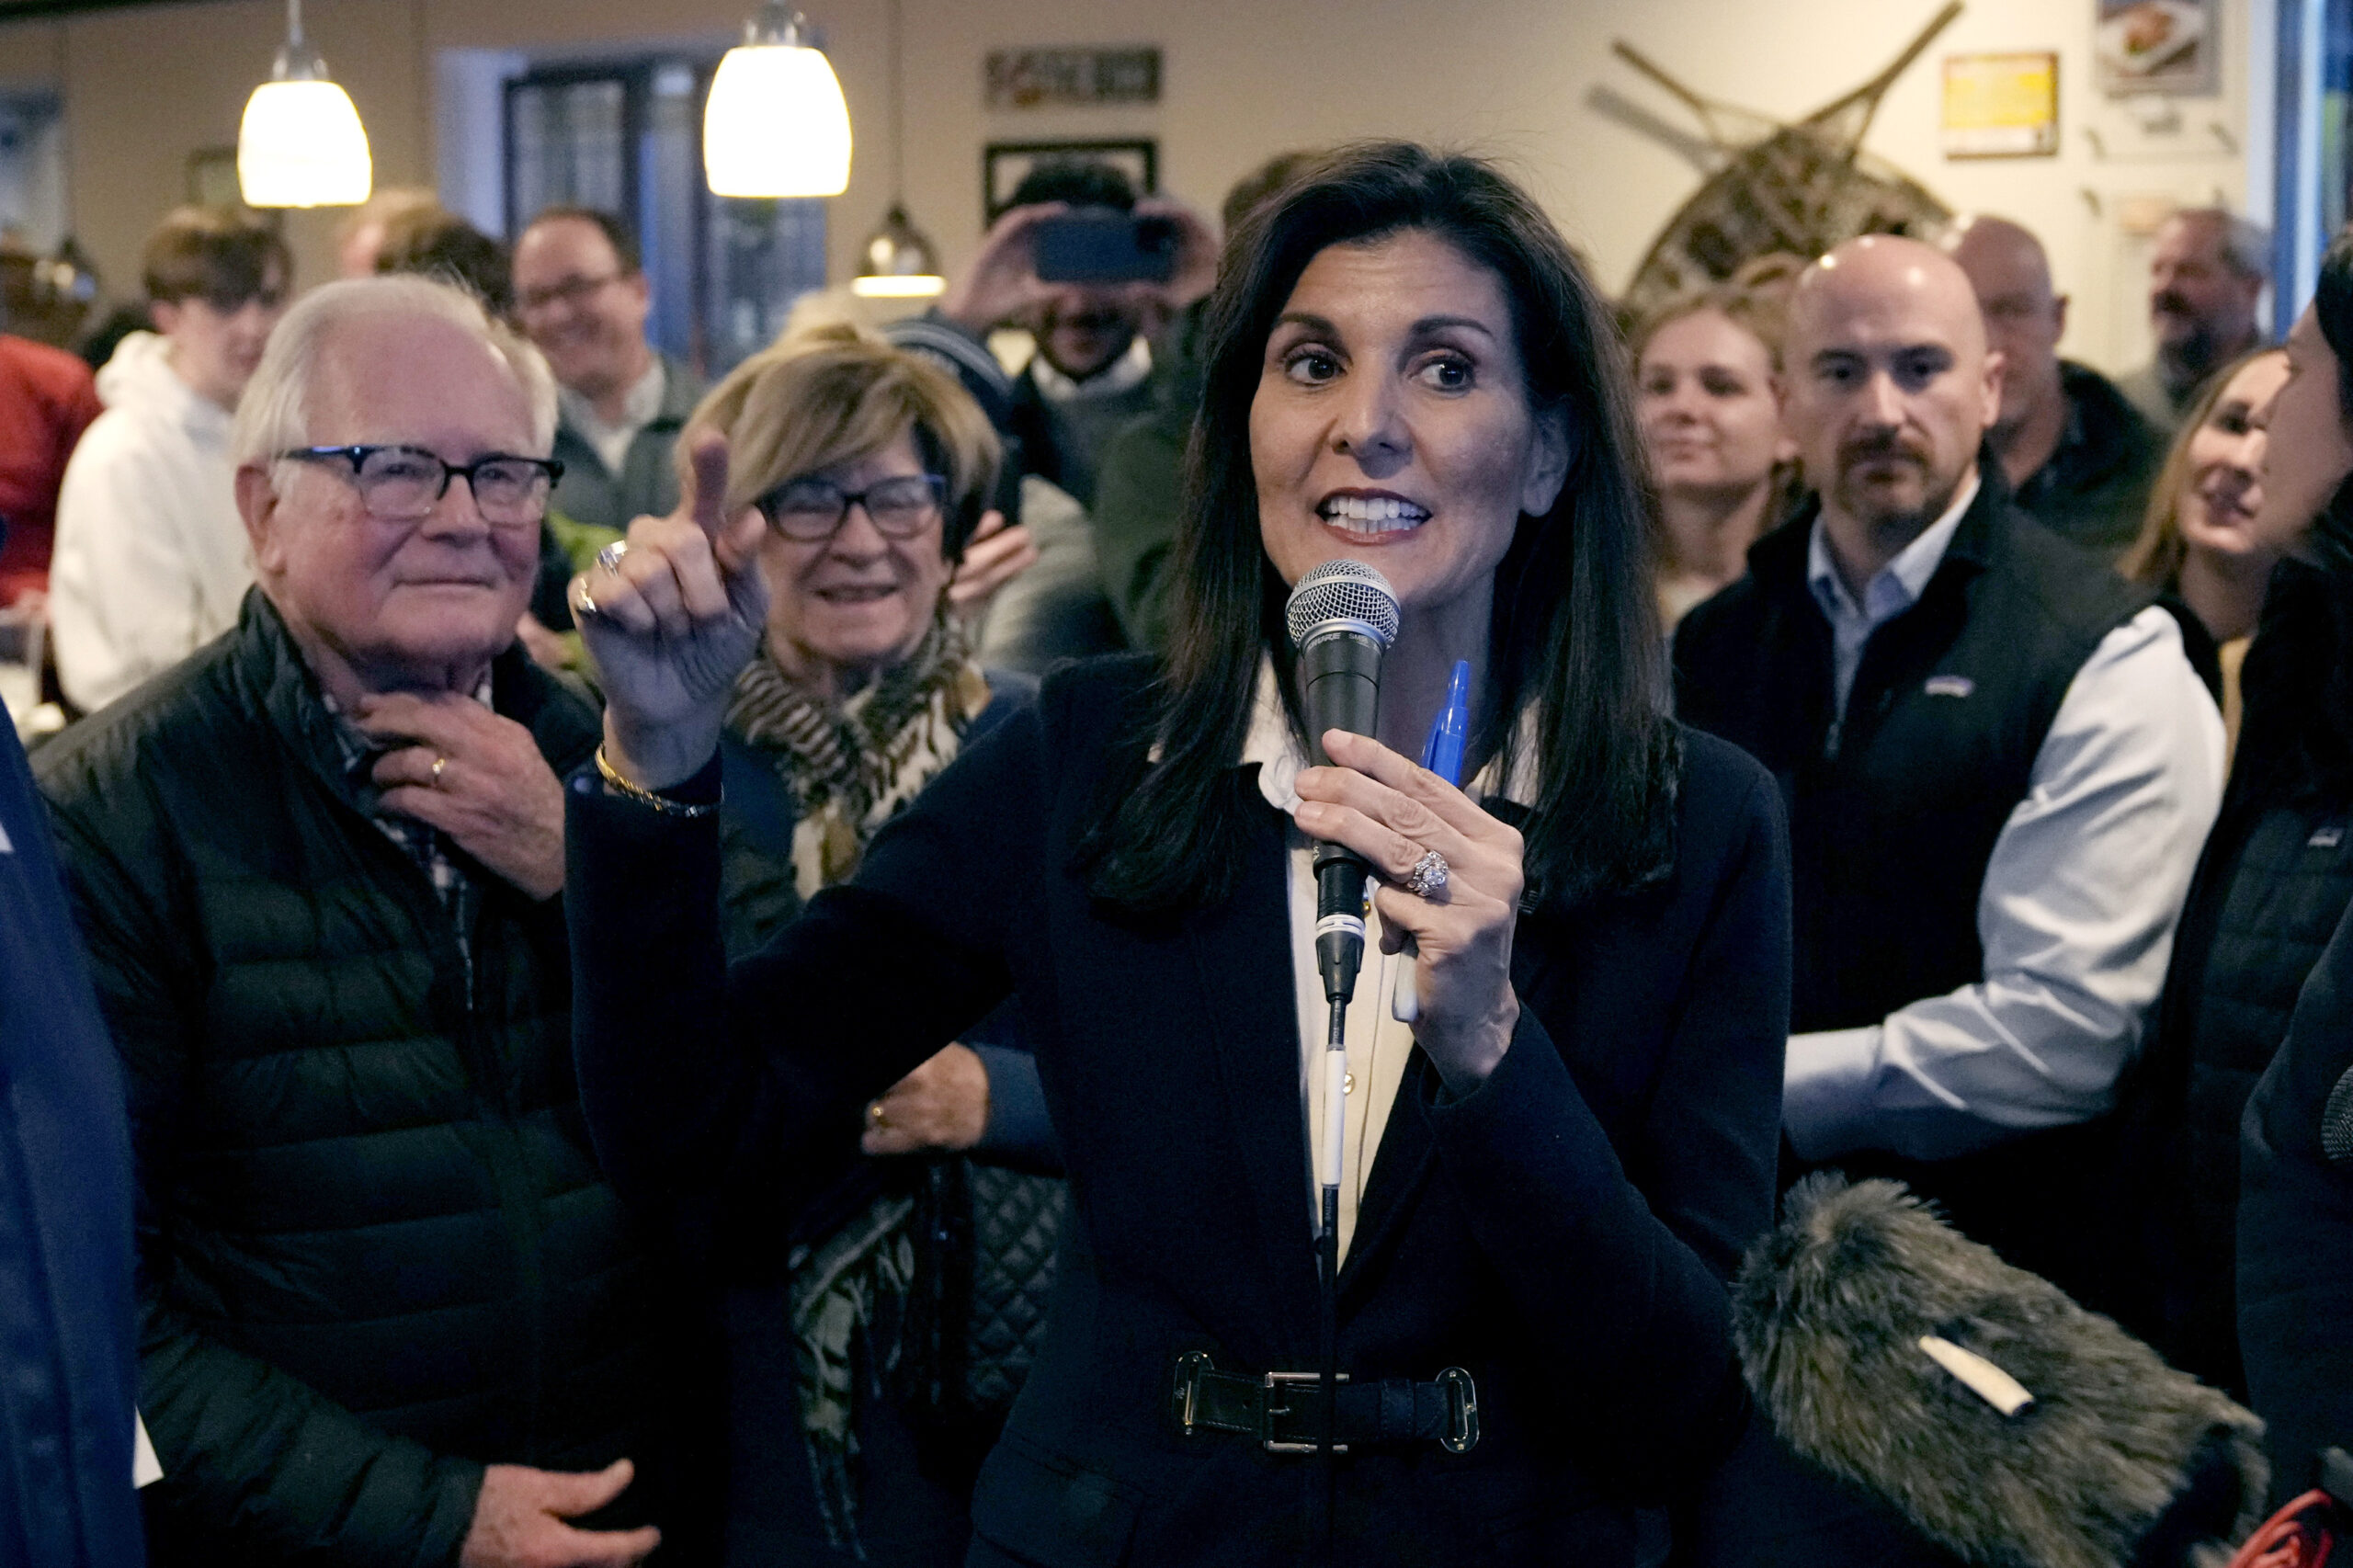 Haley to close New Hampshire campaign with 3-minute TV ad